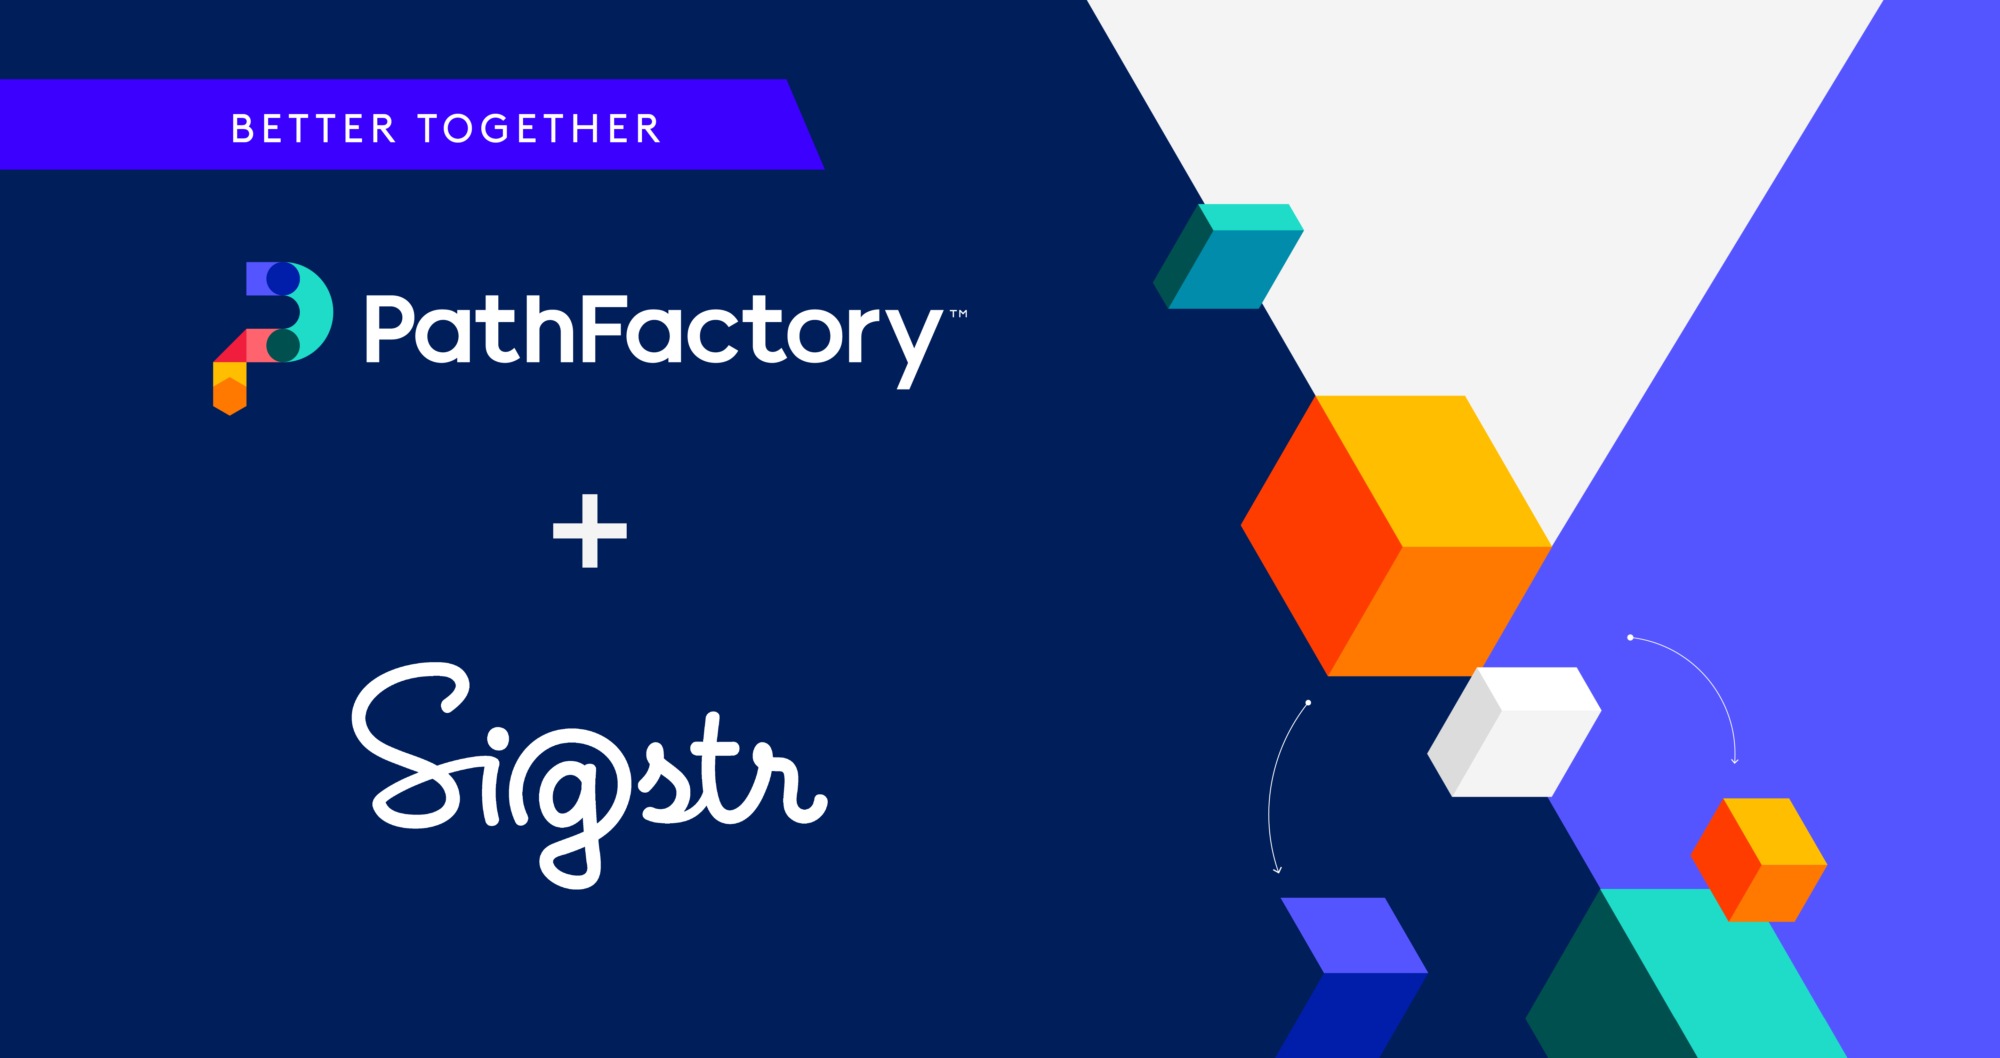 Header image with a dark blue and white background with block shapes. The title on the left states "Better Together: PathFactory + Sigstr".